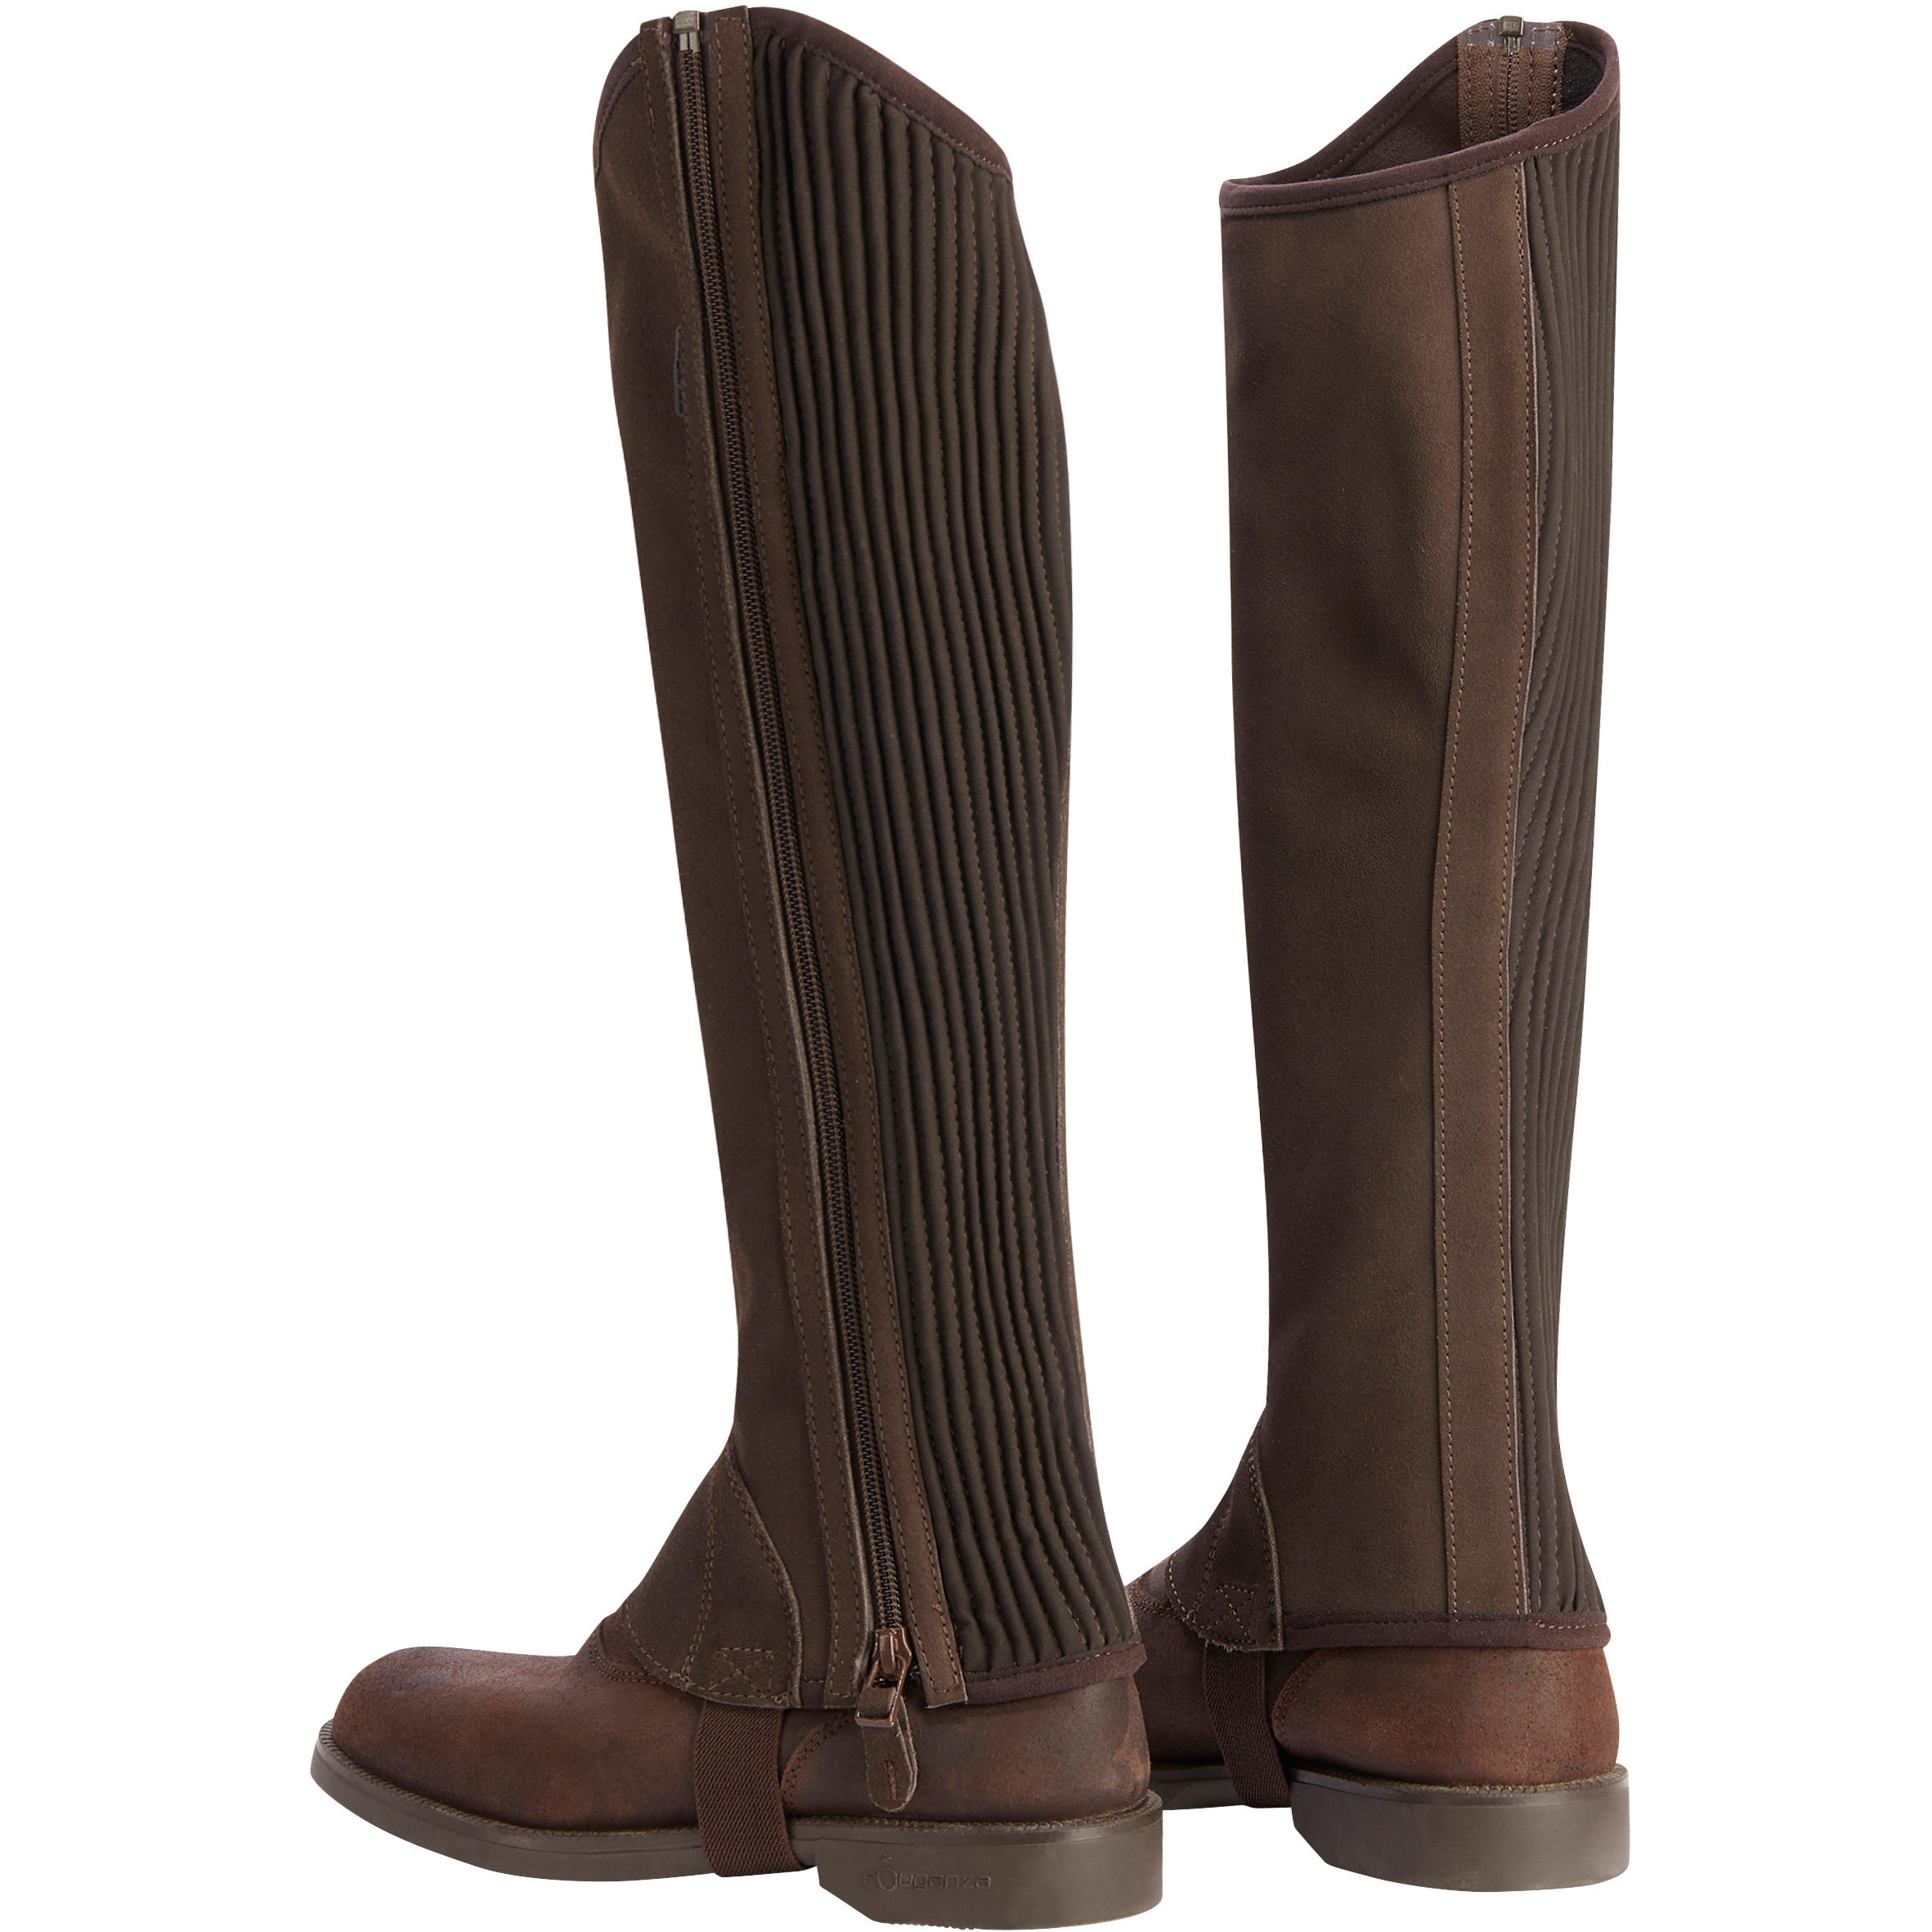 Sentier Adult Horse Riding Gusseted Half-Chaps - Brown 4/12